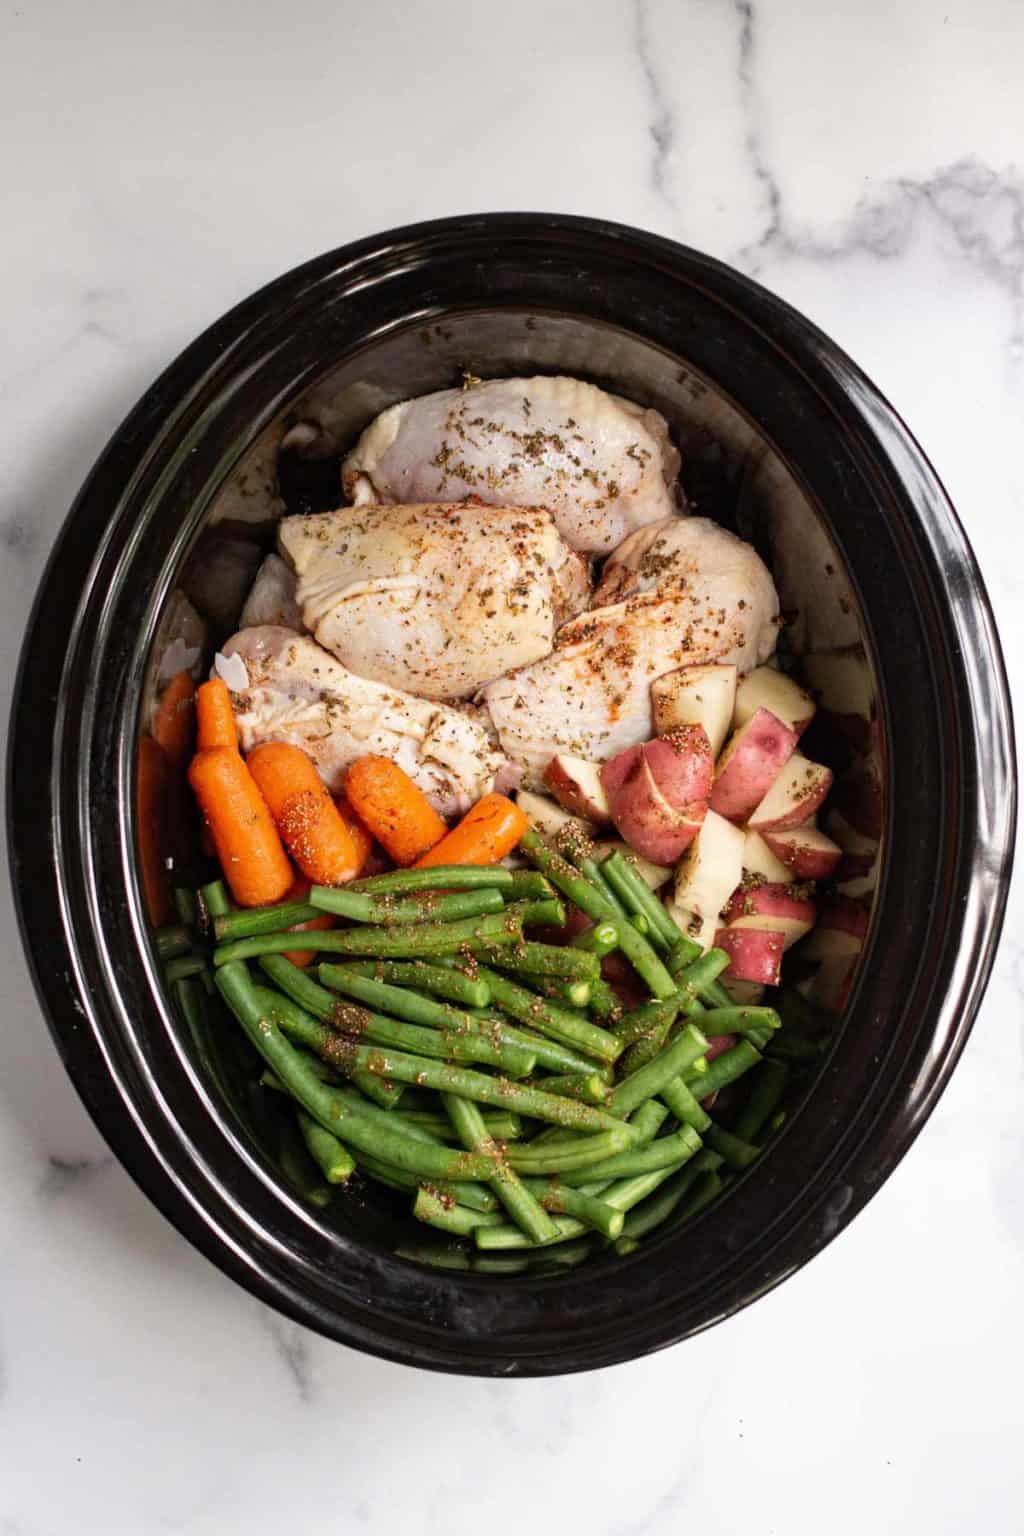 Slow Cooker Chicken Thighs and Vegetables with Herbs